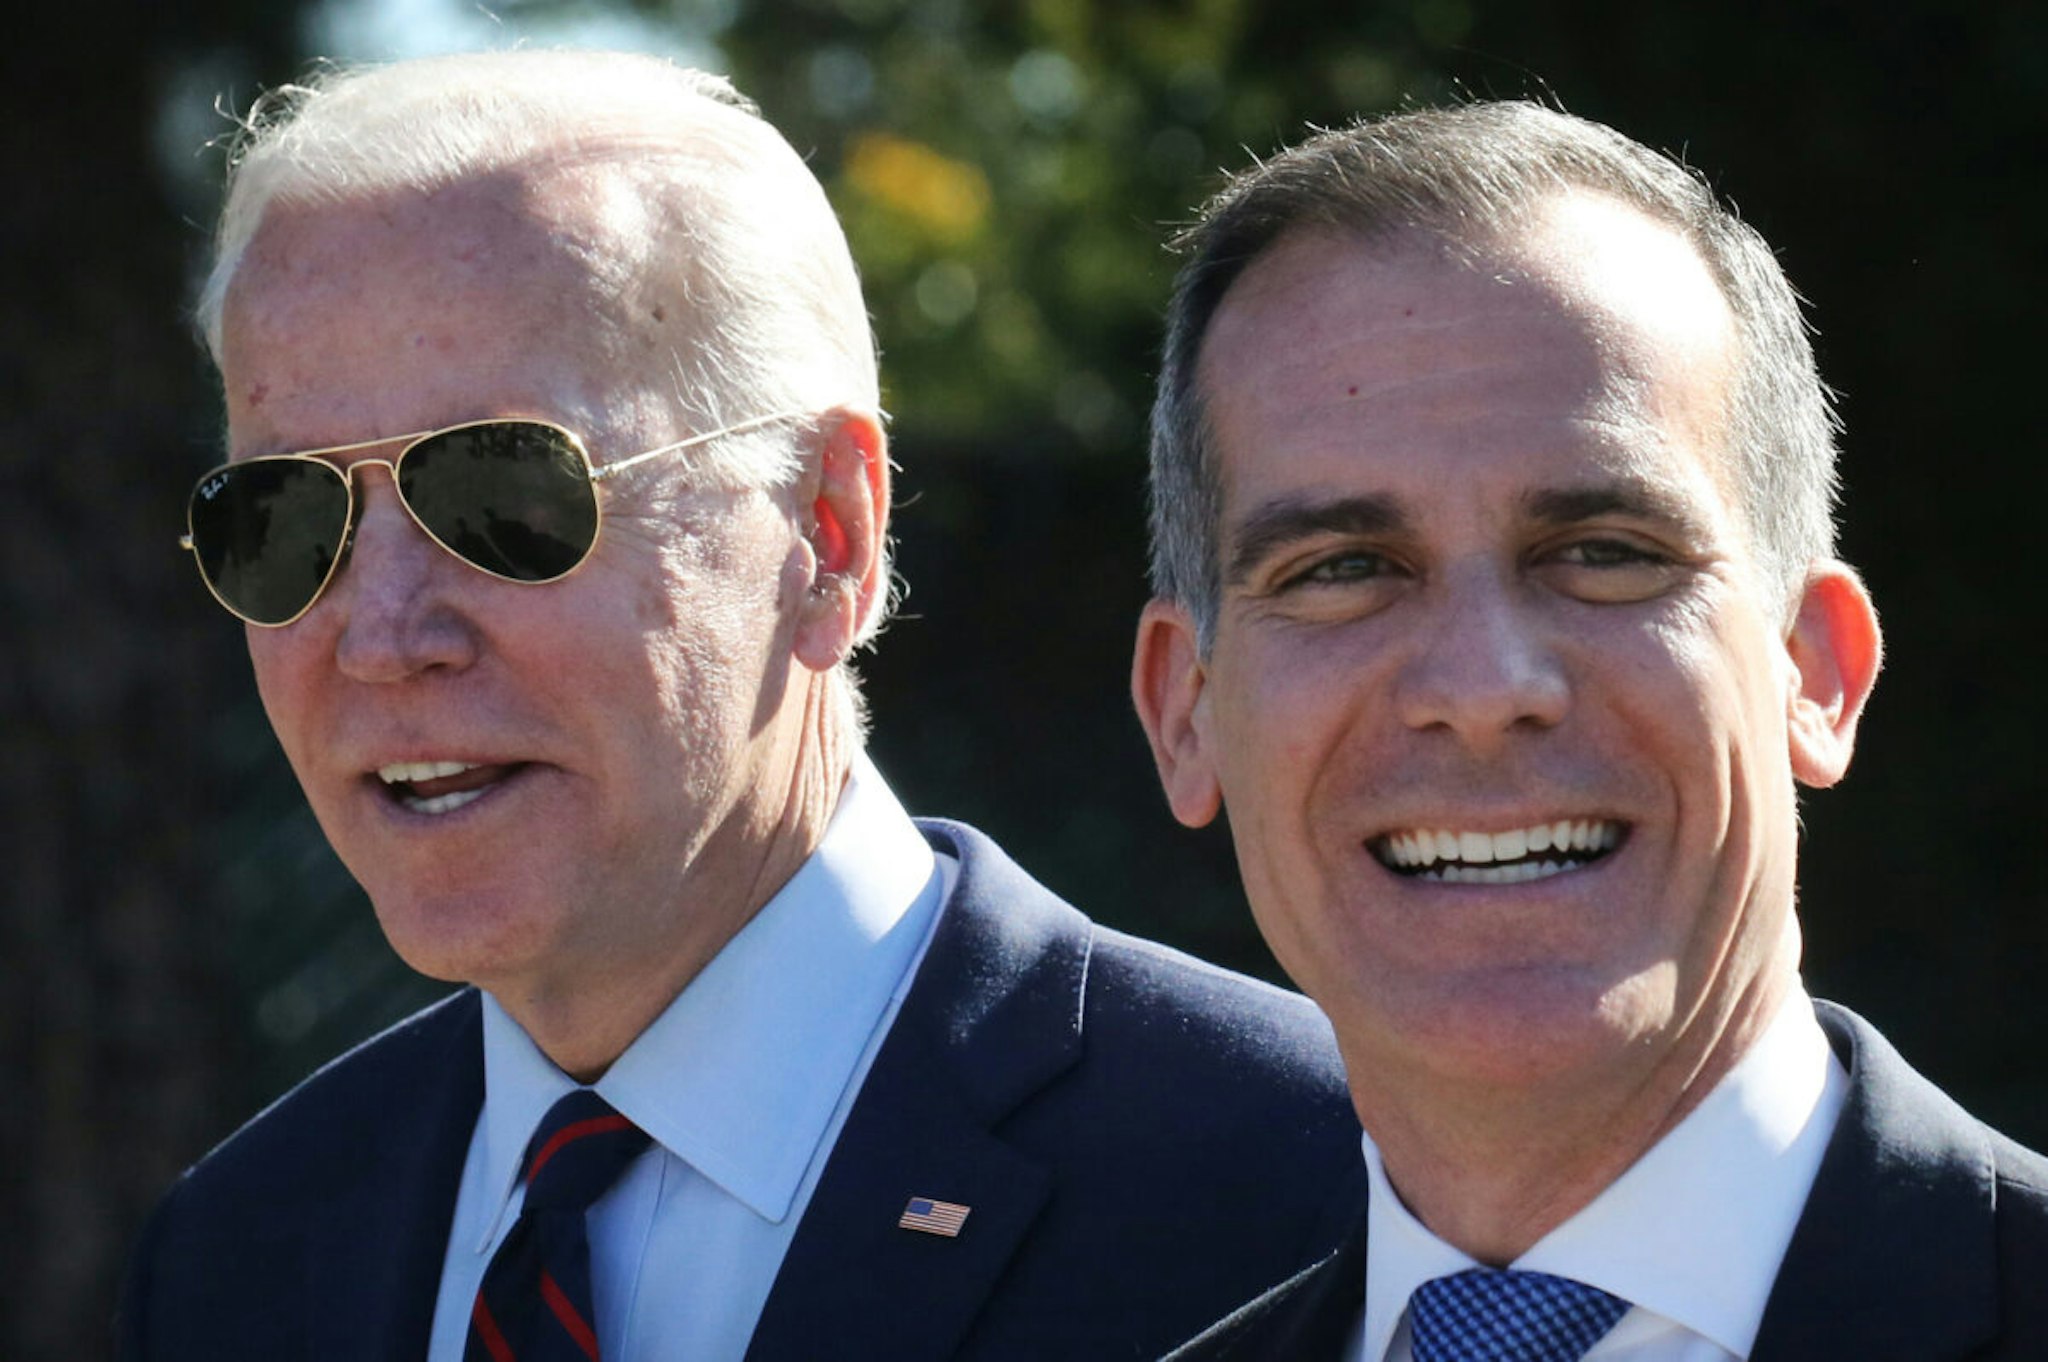 Democratic presidential candidate former U.S. Vice President Joe Biden (L) walks with Los Angeles Mayor Eric Garcetti at a campaign event at United Firefighters of Los Angeles City on January 10, 2020 in Los Angeles, California.